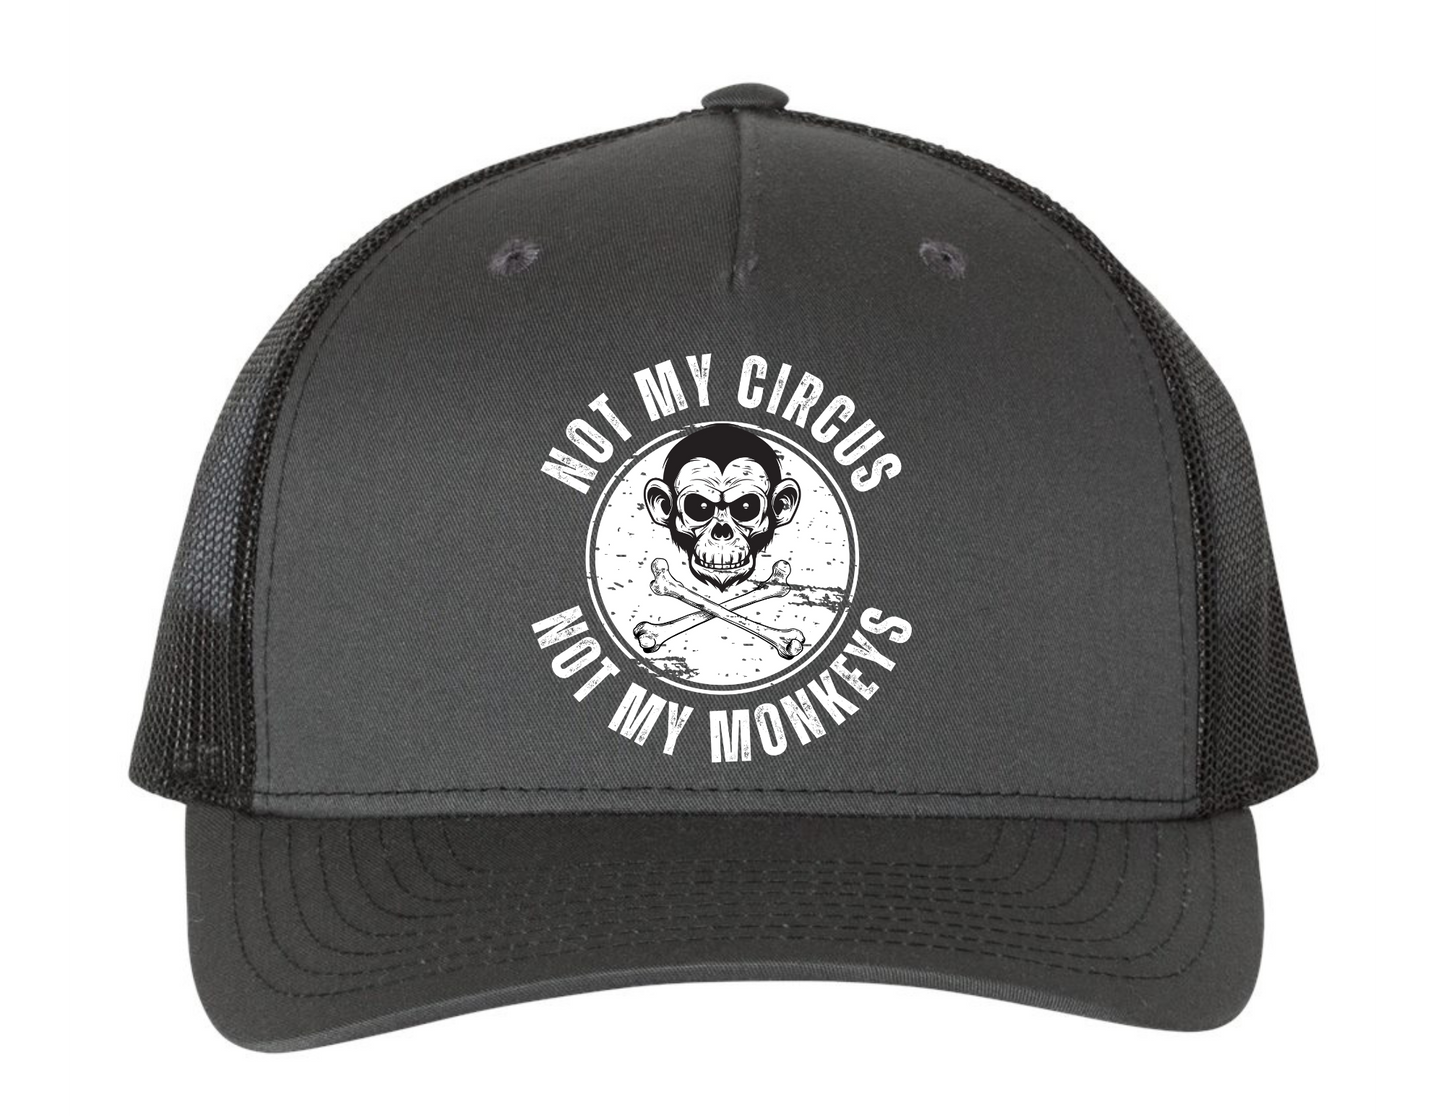 Not My Circus, Not My Monkeys Hat